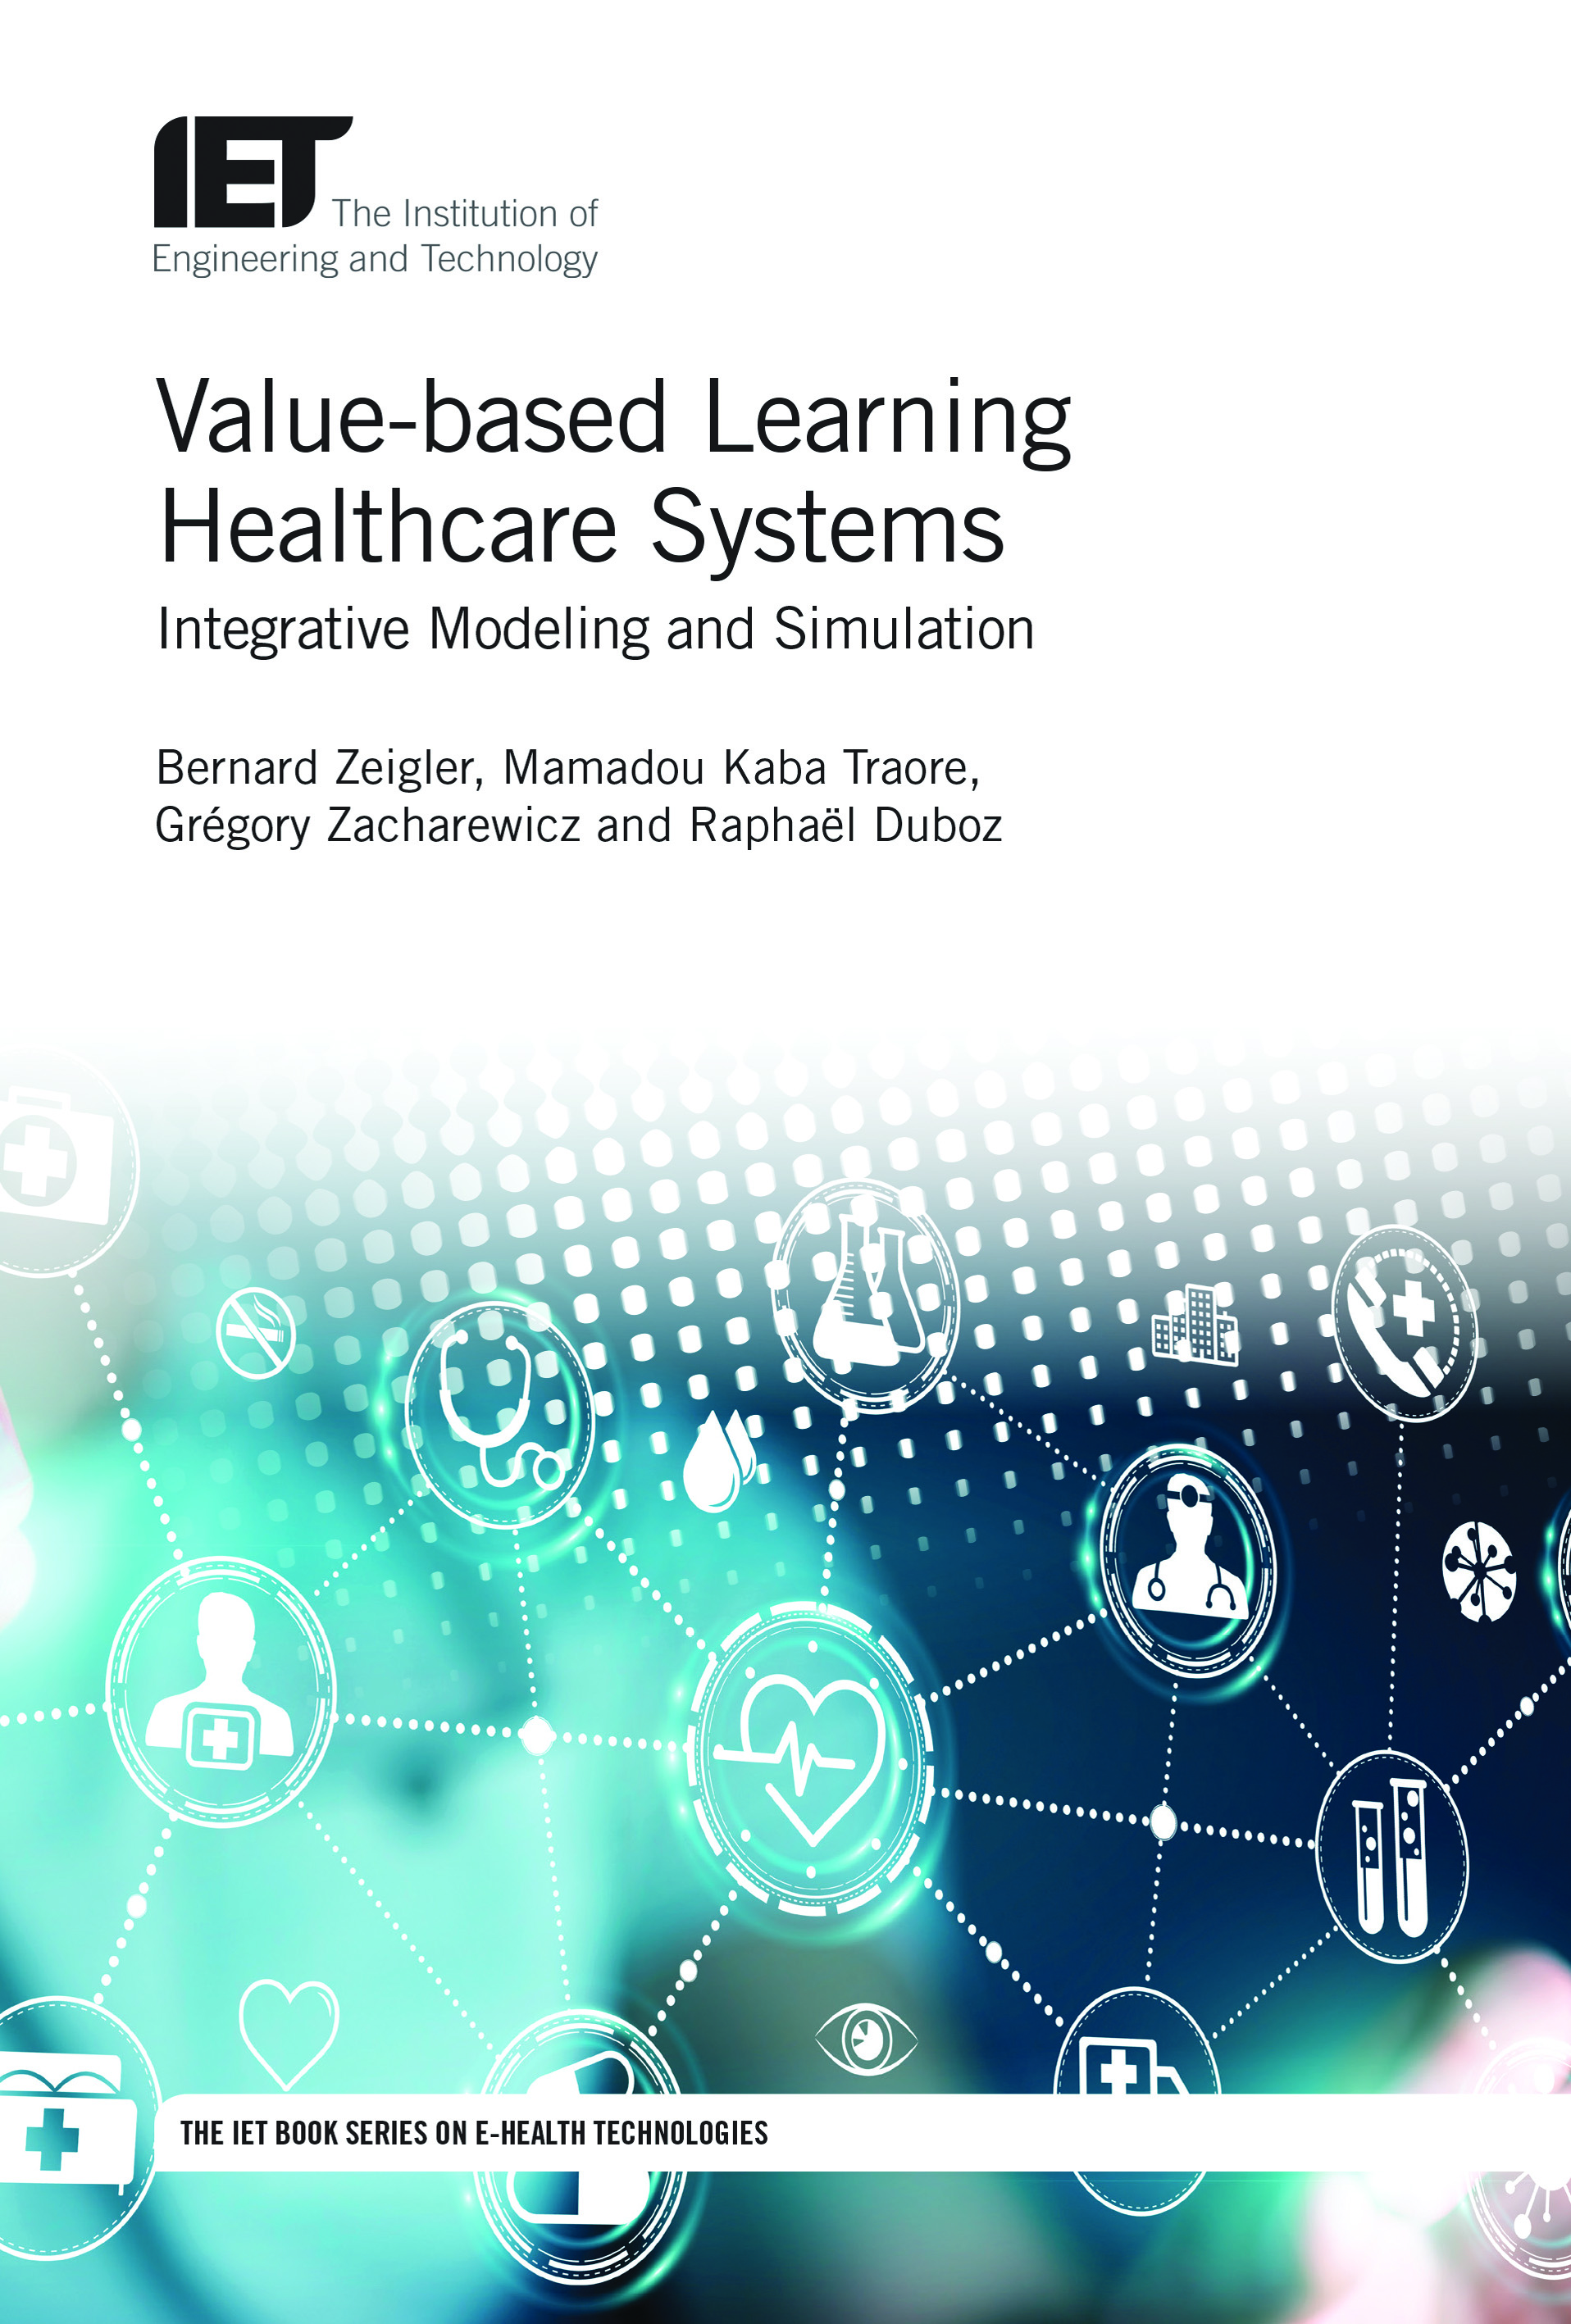 Value-based Learning Healthcare Systems, Integrative modeling and simulation